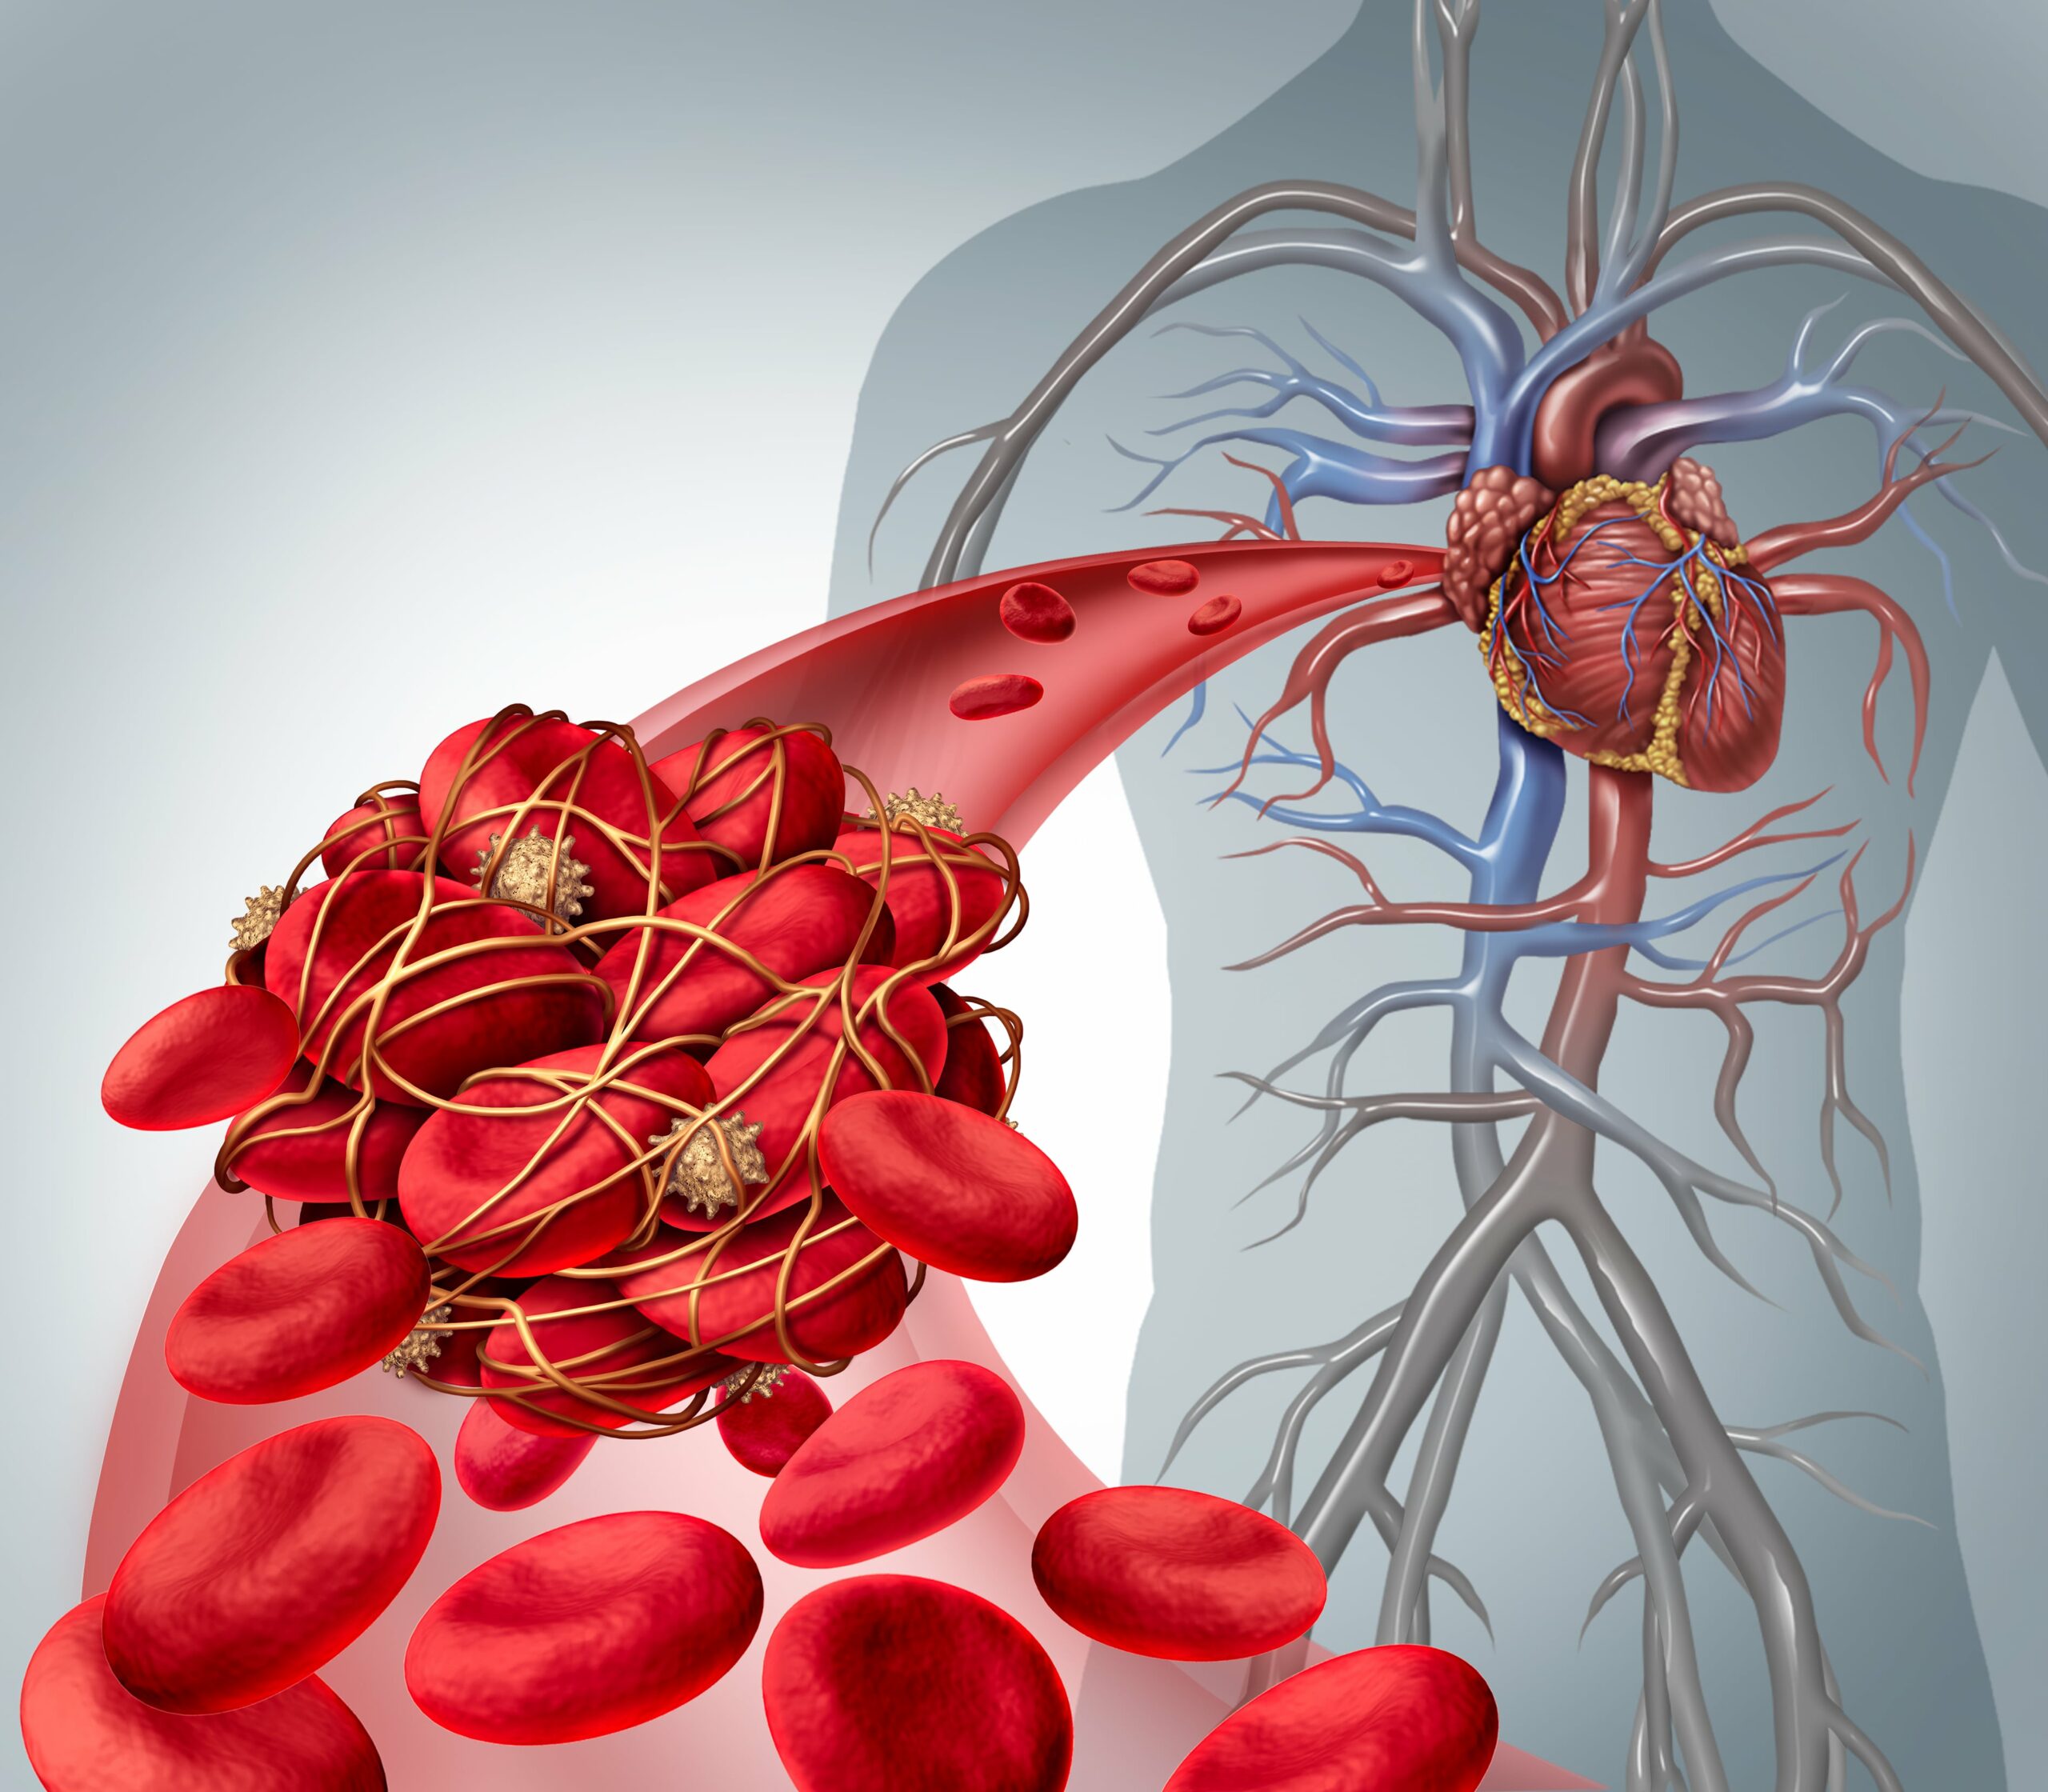 Food or Drinks That Raise the Risk of Blood Clots